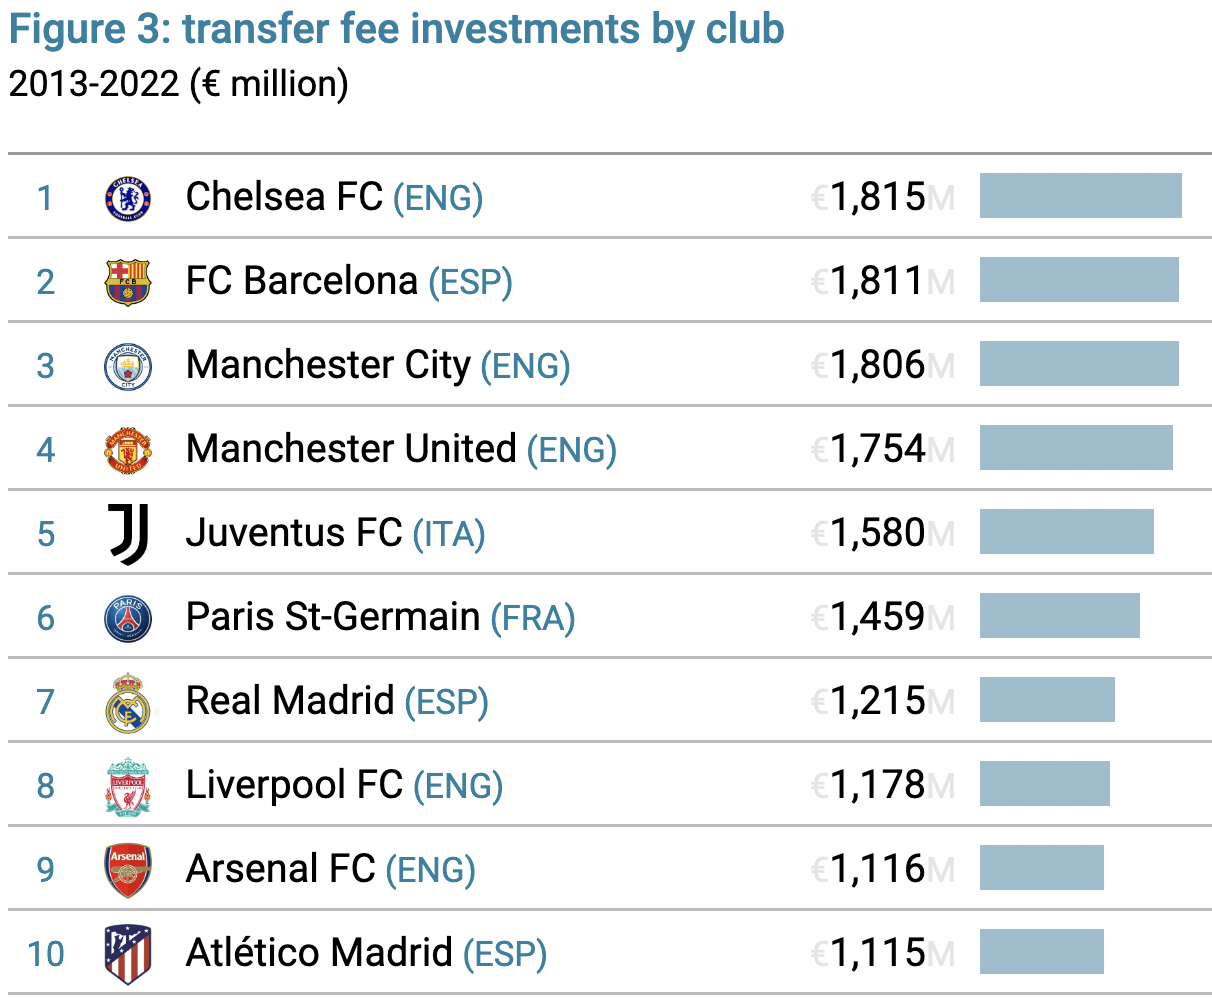 Premier League clubs record a €9.5bn trading loss on player transfers